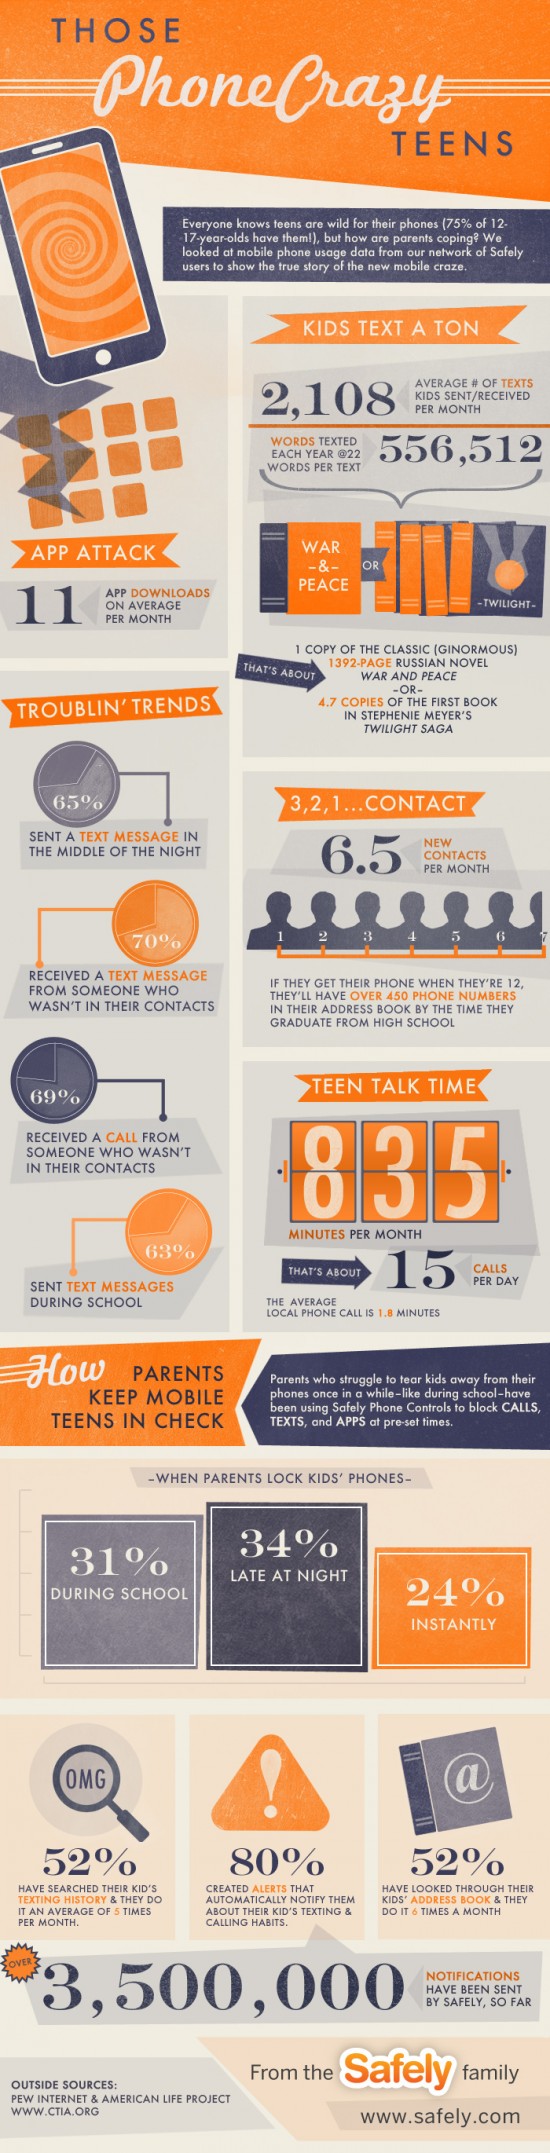 Teen texting and smartphone habits